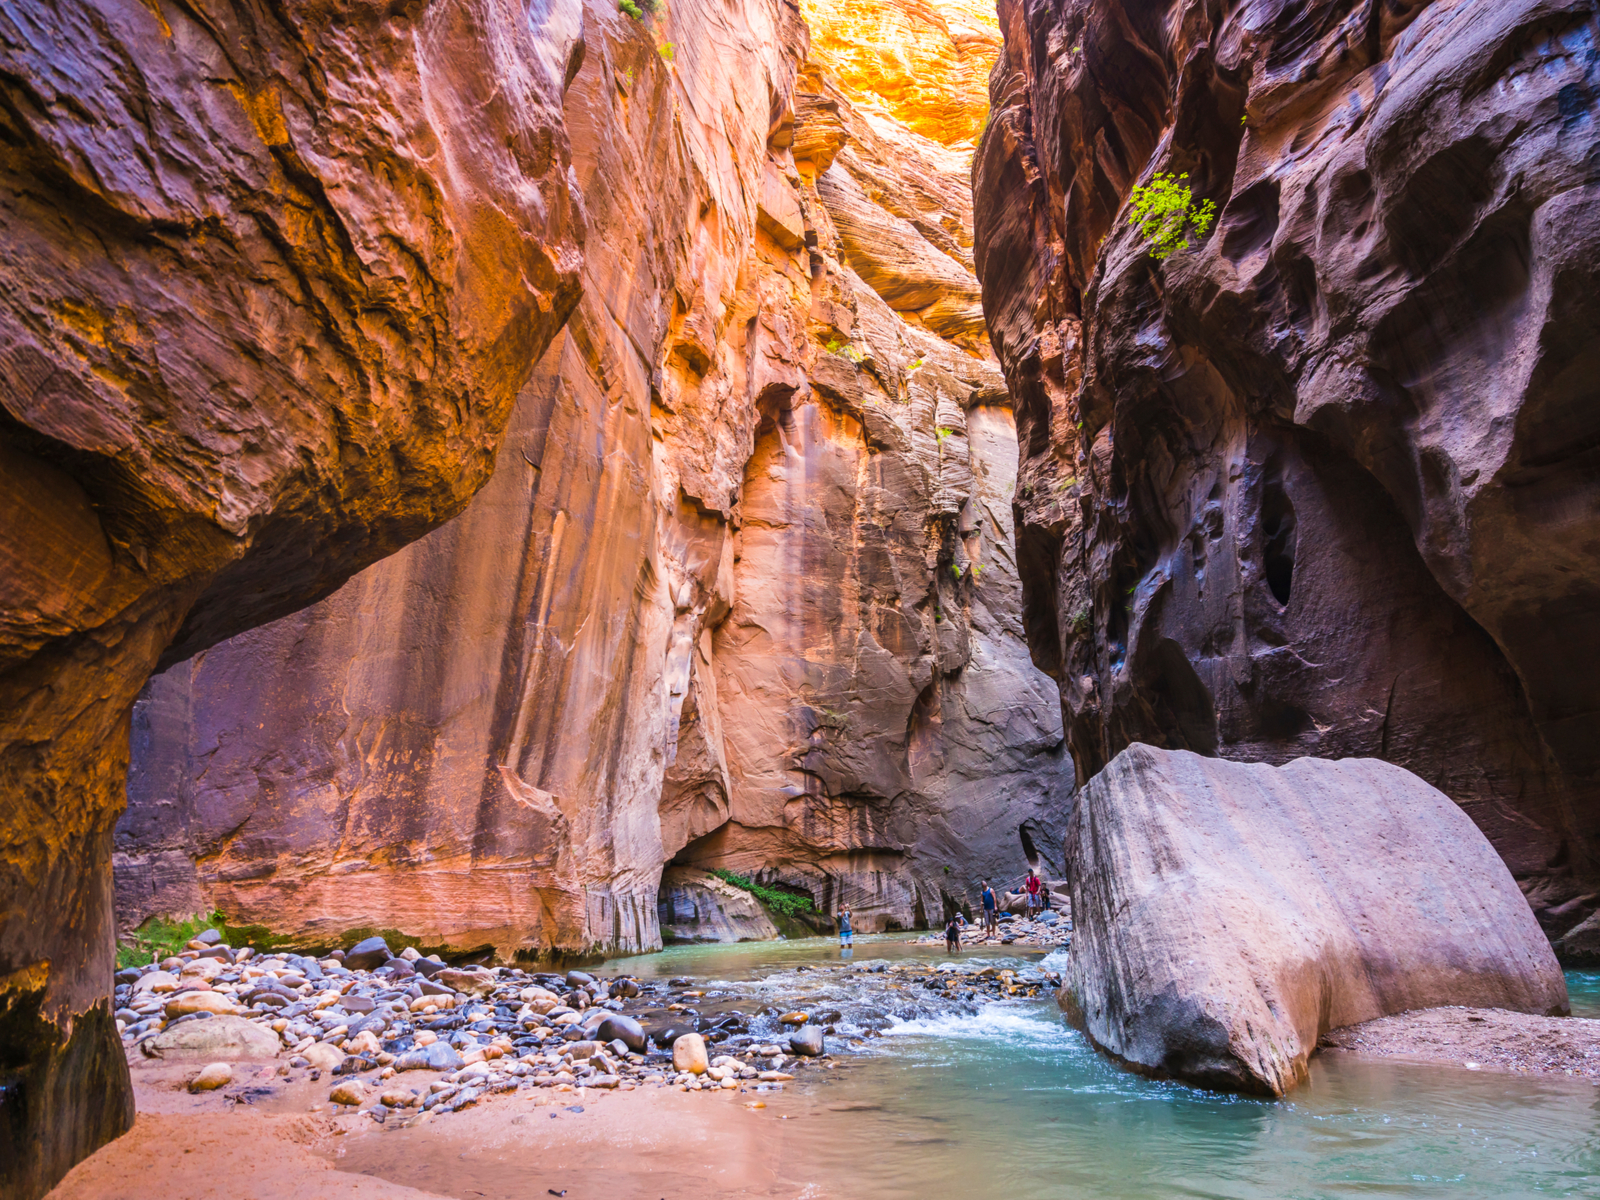 Group of people exploring the narrows section of Zion National Park